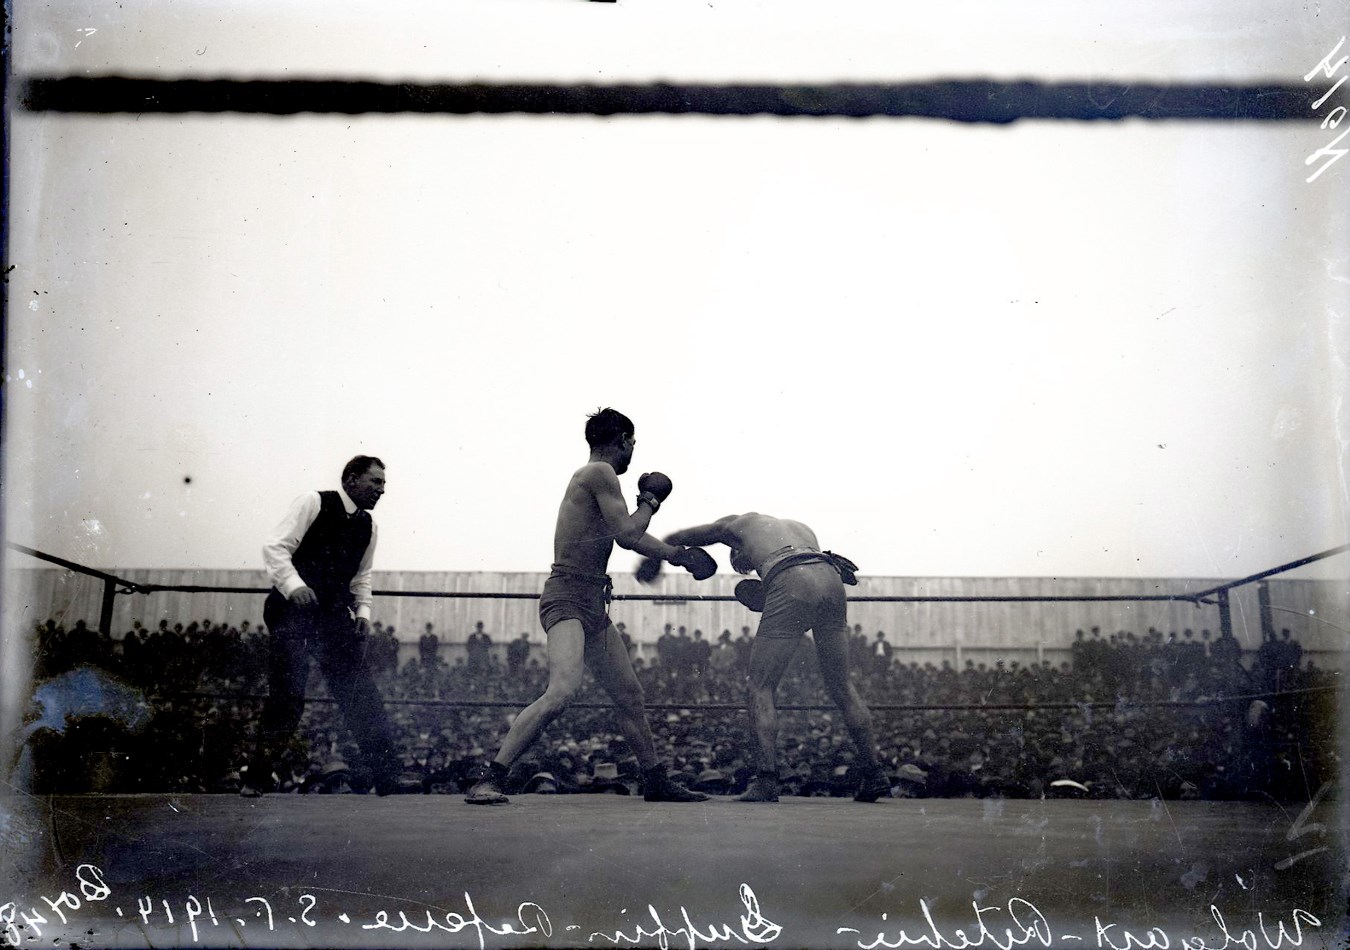 - 1914 Wolgast vs. Ritchie "Battling in the Ring" Type I Glass Plate Negative by Dana Studios